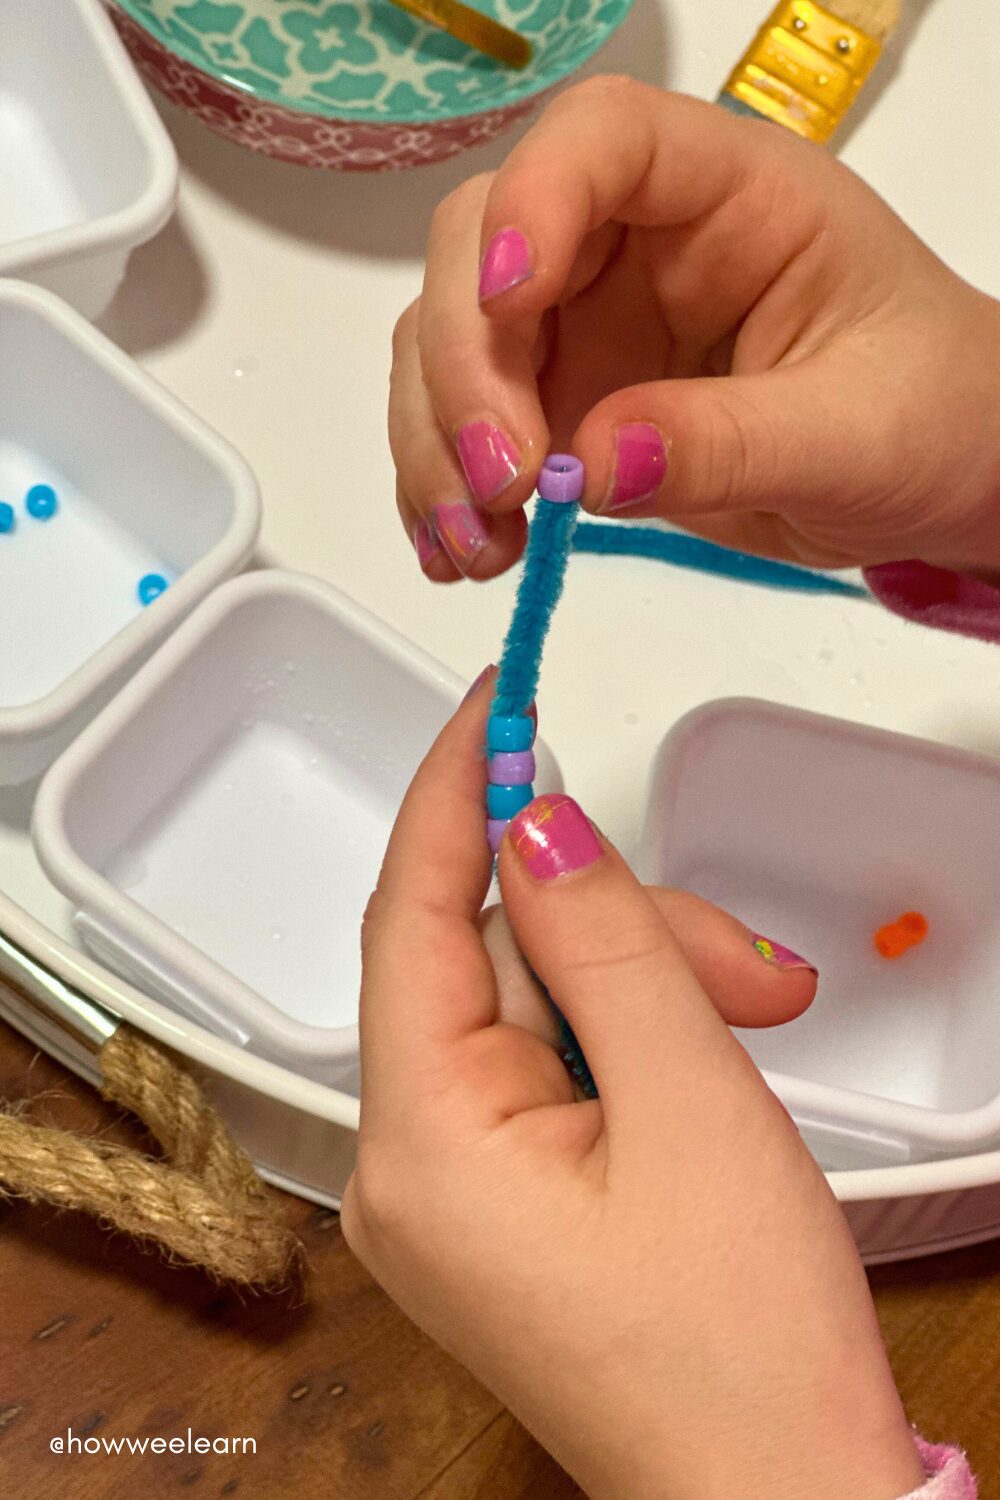 Free the Frozen Beads: Patterning Extension Activity